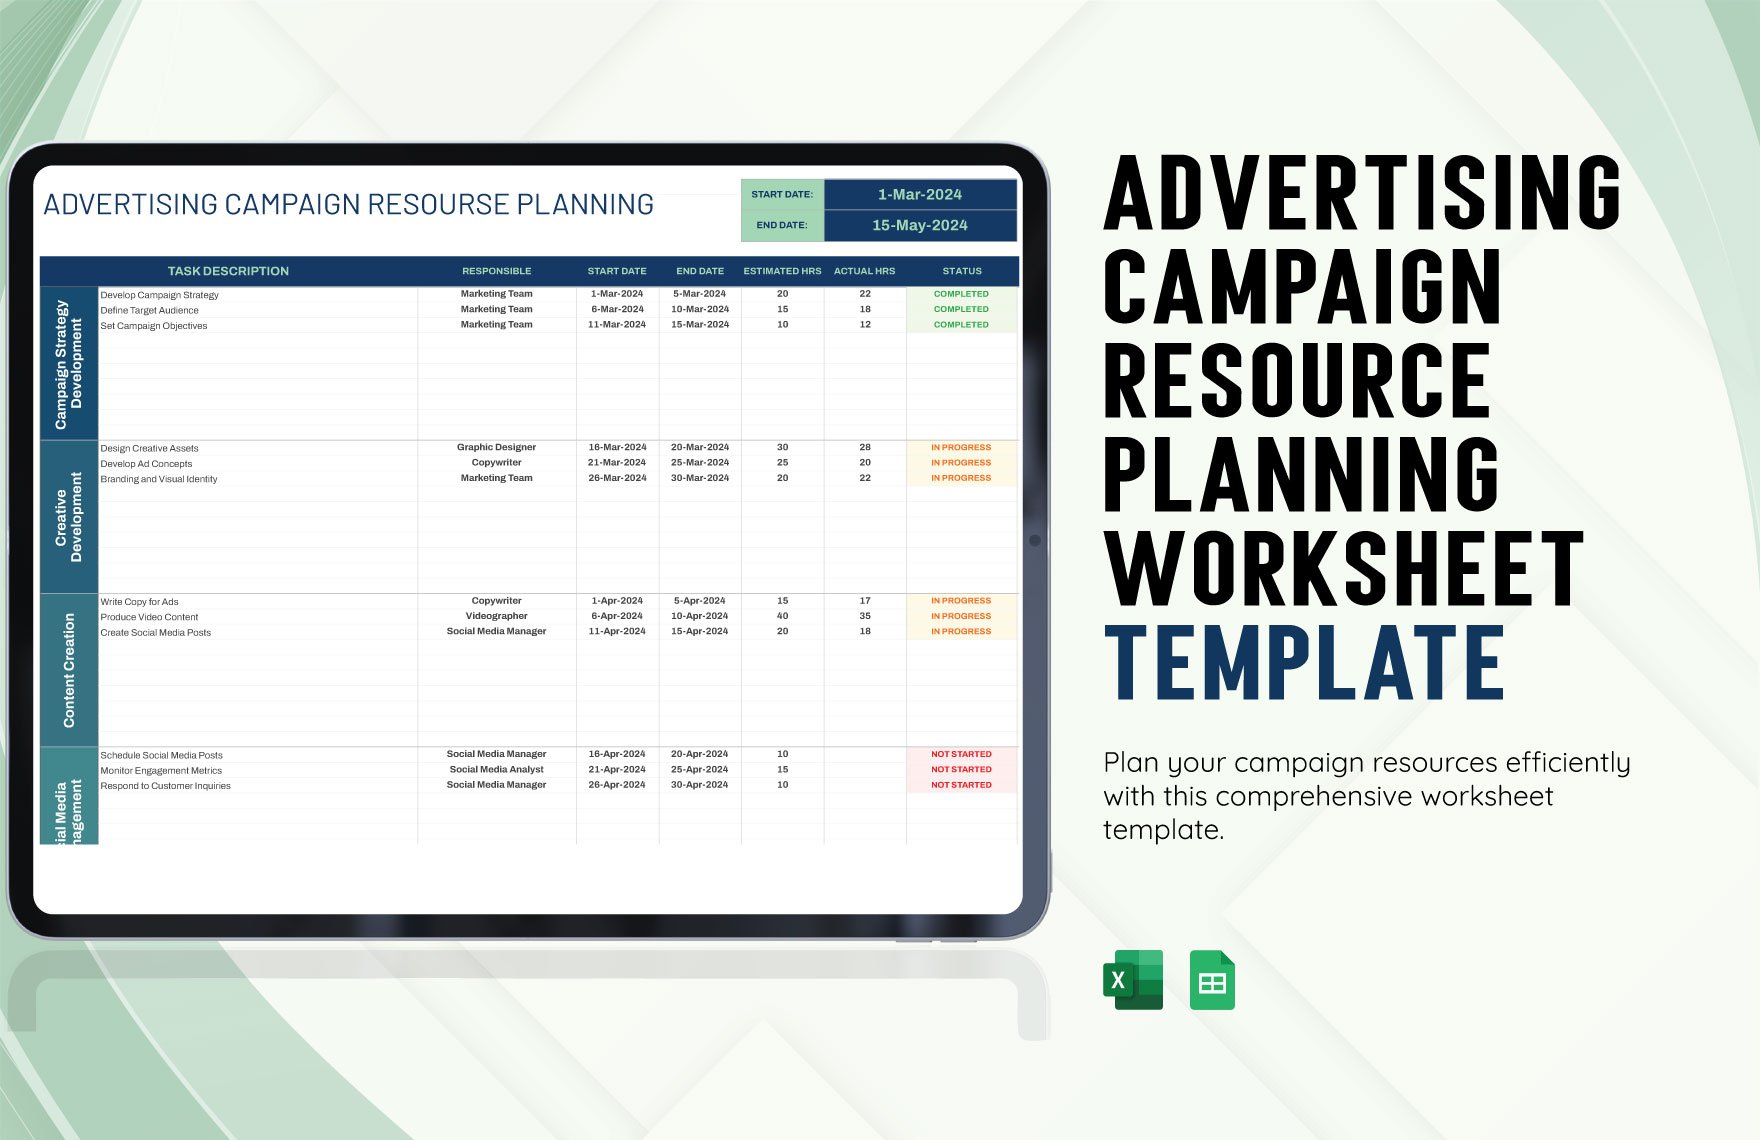 Advertising Campaign Resource Planning Worksheet Template in Excel, Google Sheets